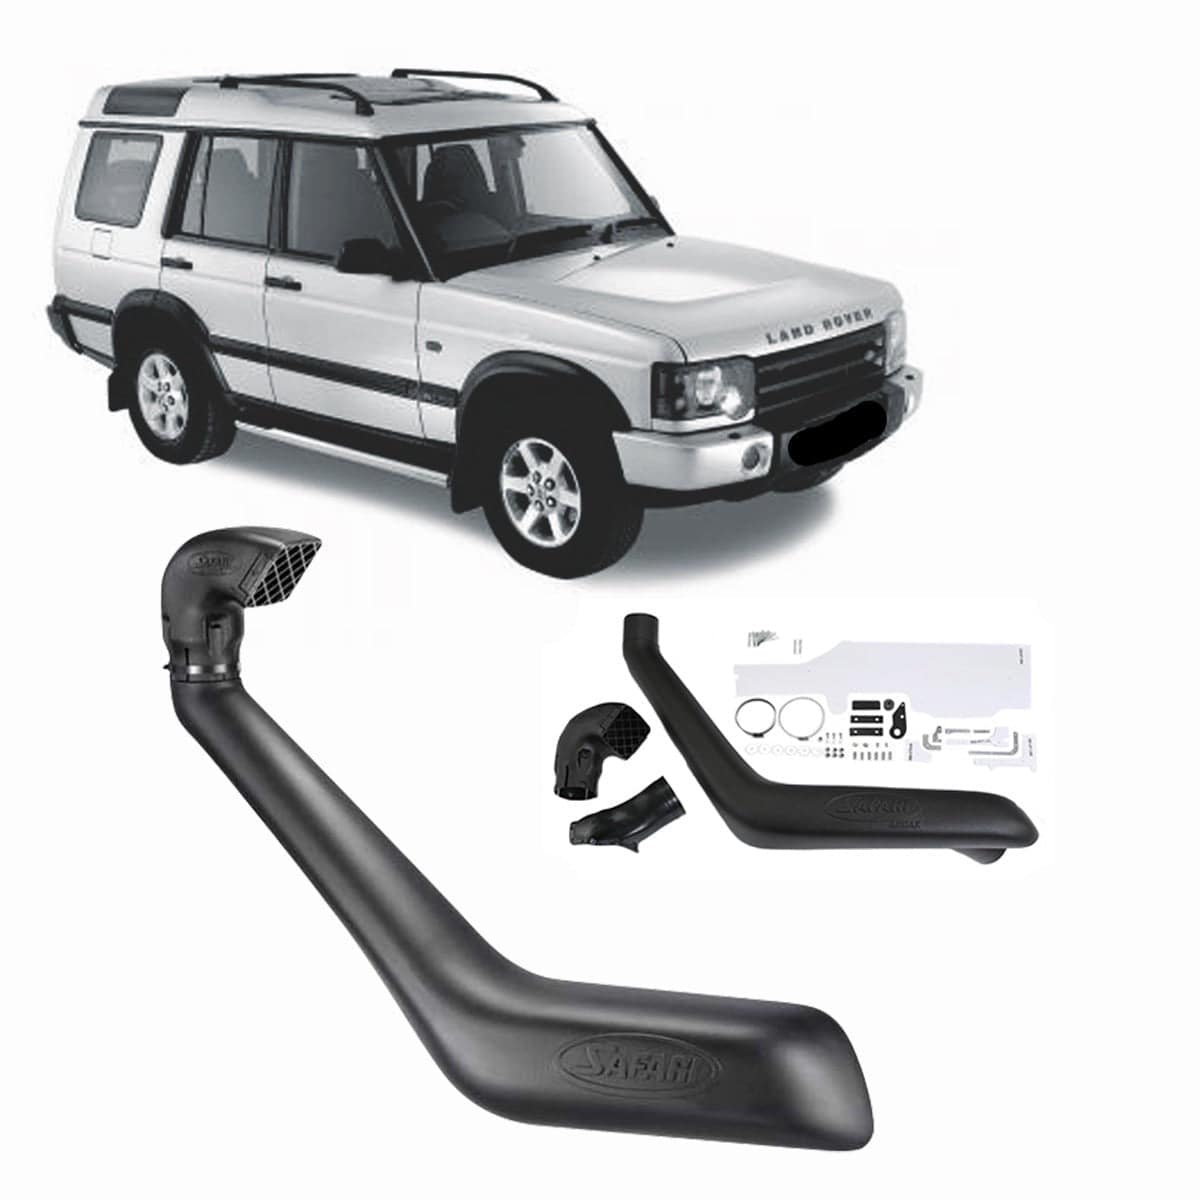 Safari Snorkel to suit Land Rover Discovery (01/1999 - 2005) - OZI4X4 PTY LTD